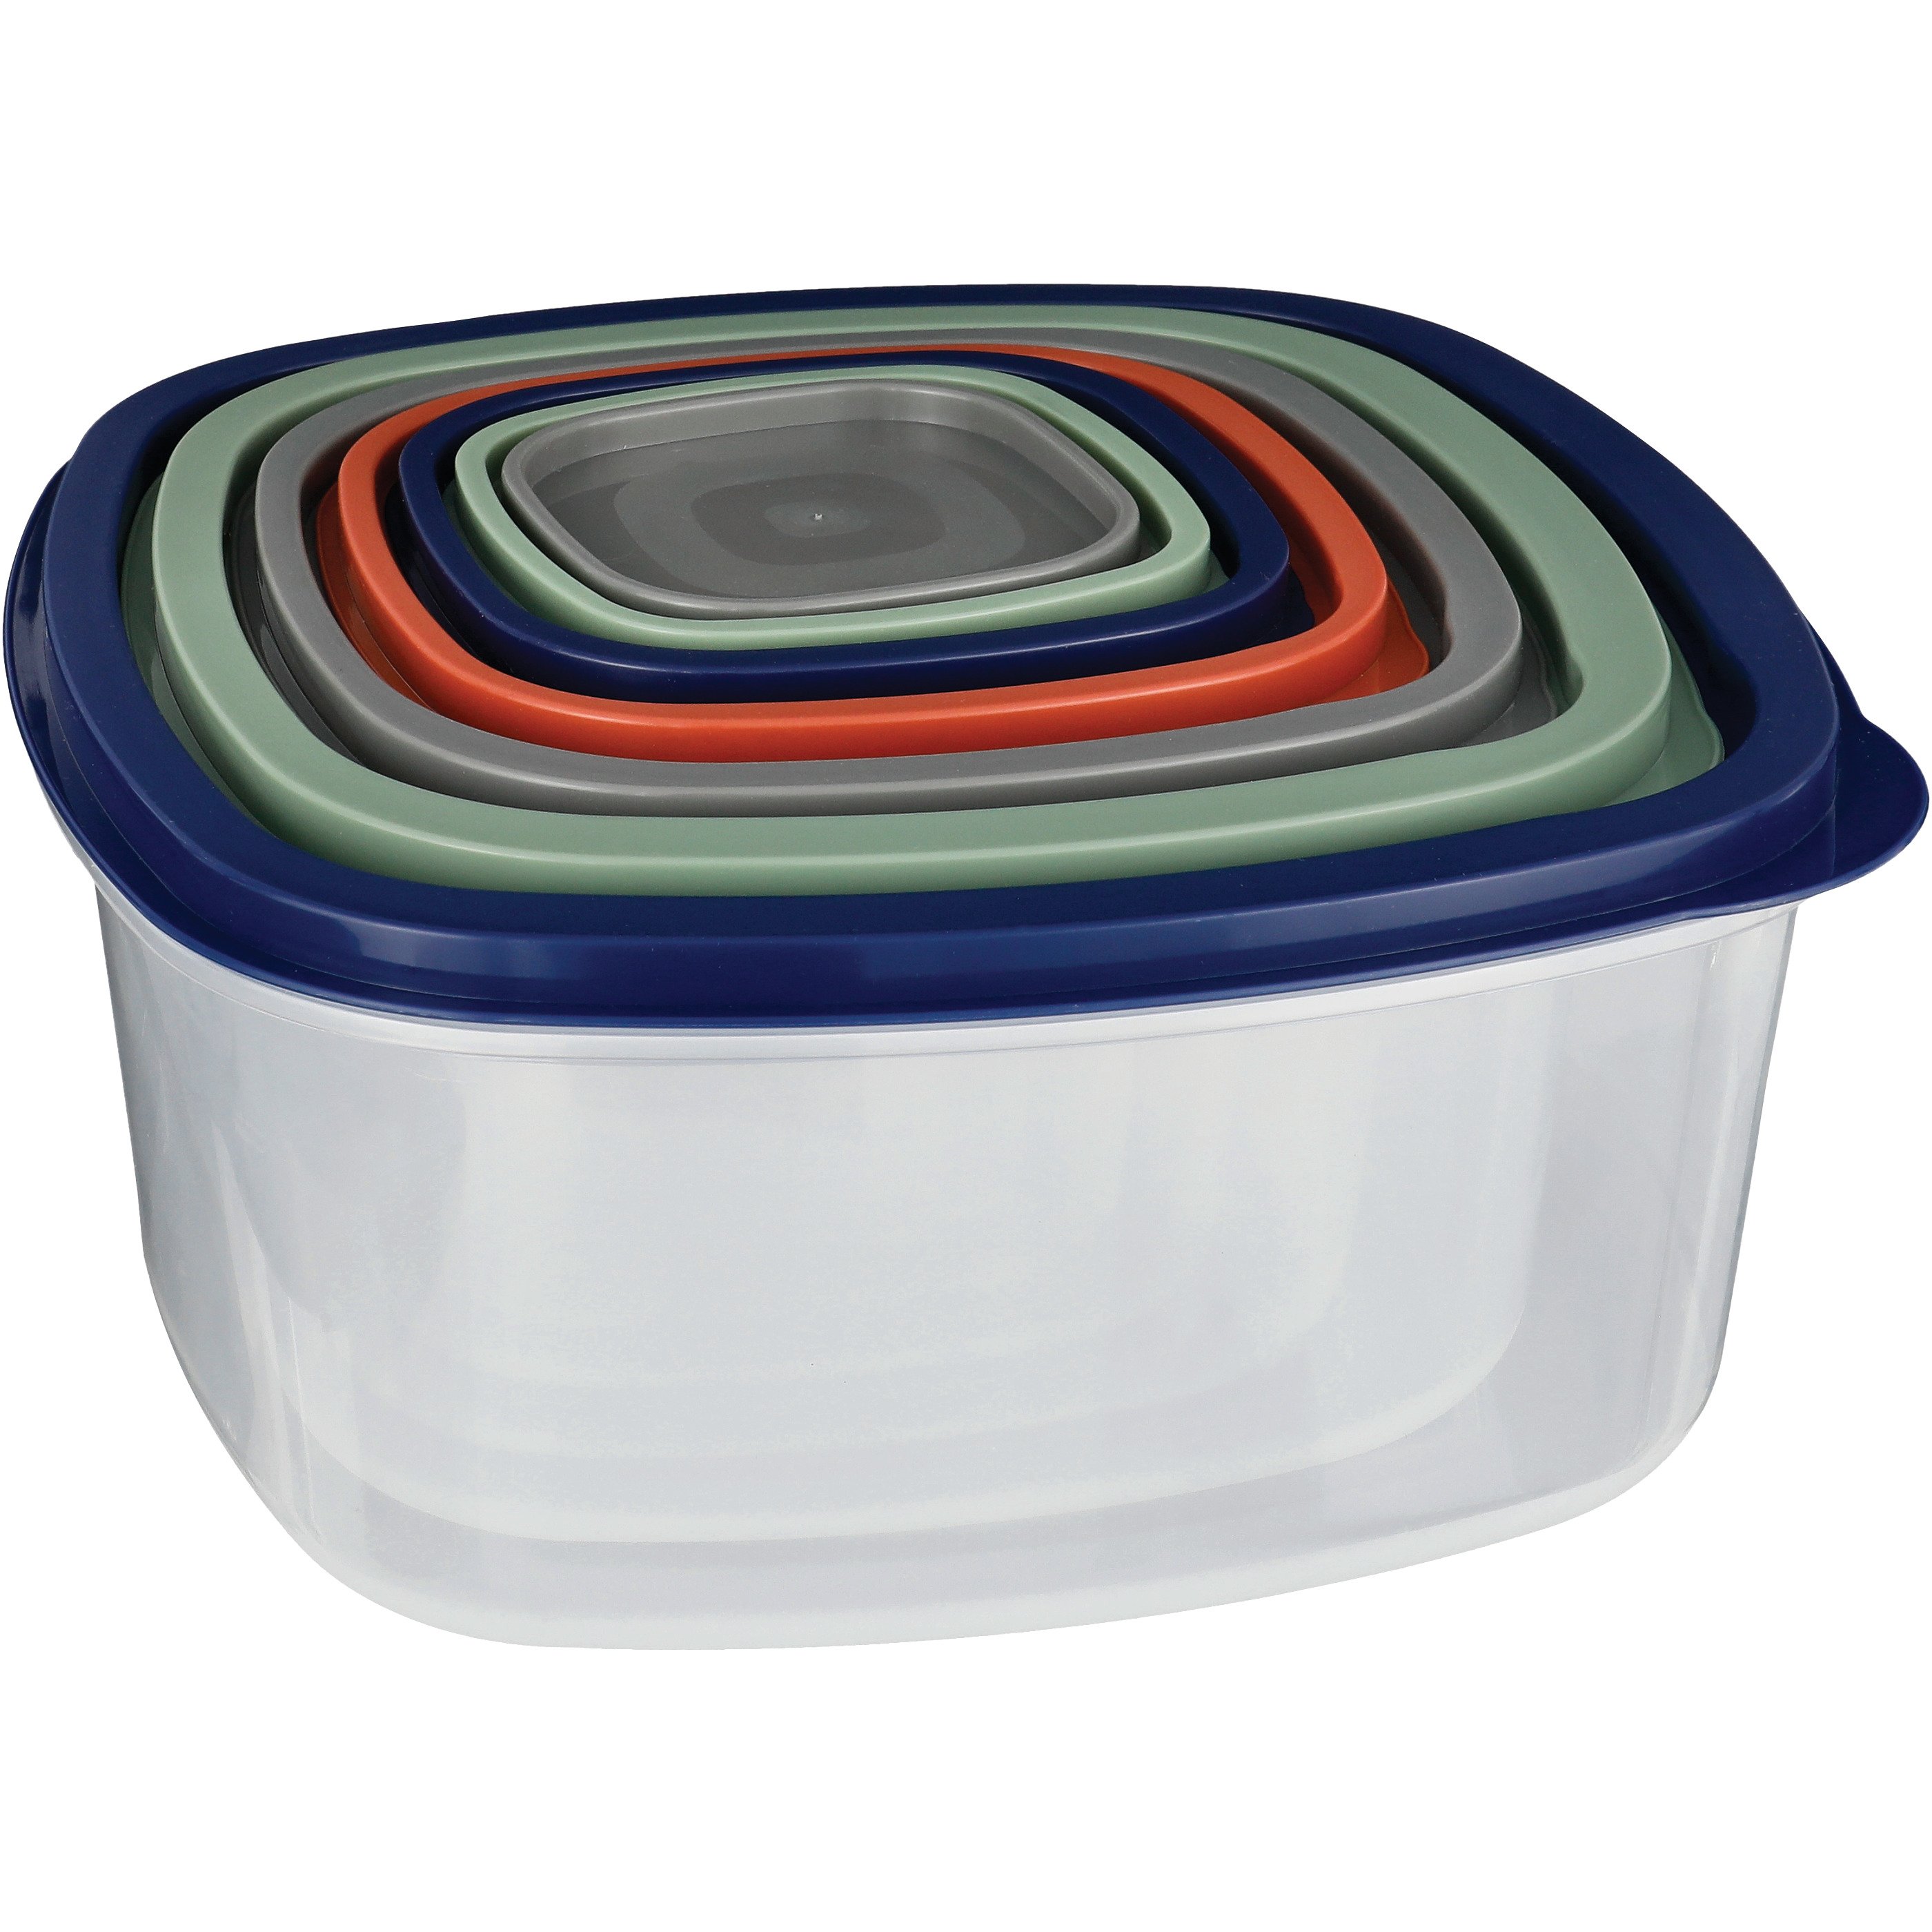 chefstyle Reusable Food Storage Container Set - Shop Food Storage at H-E-B